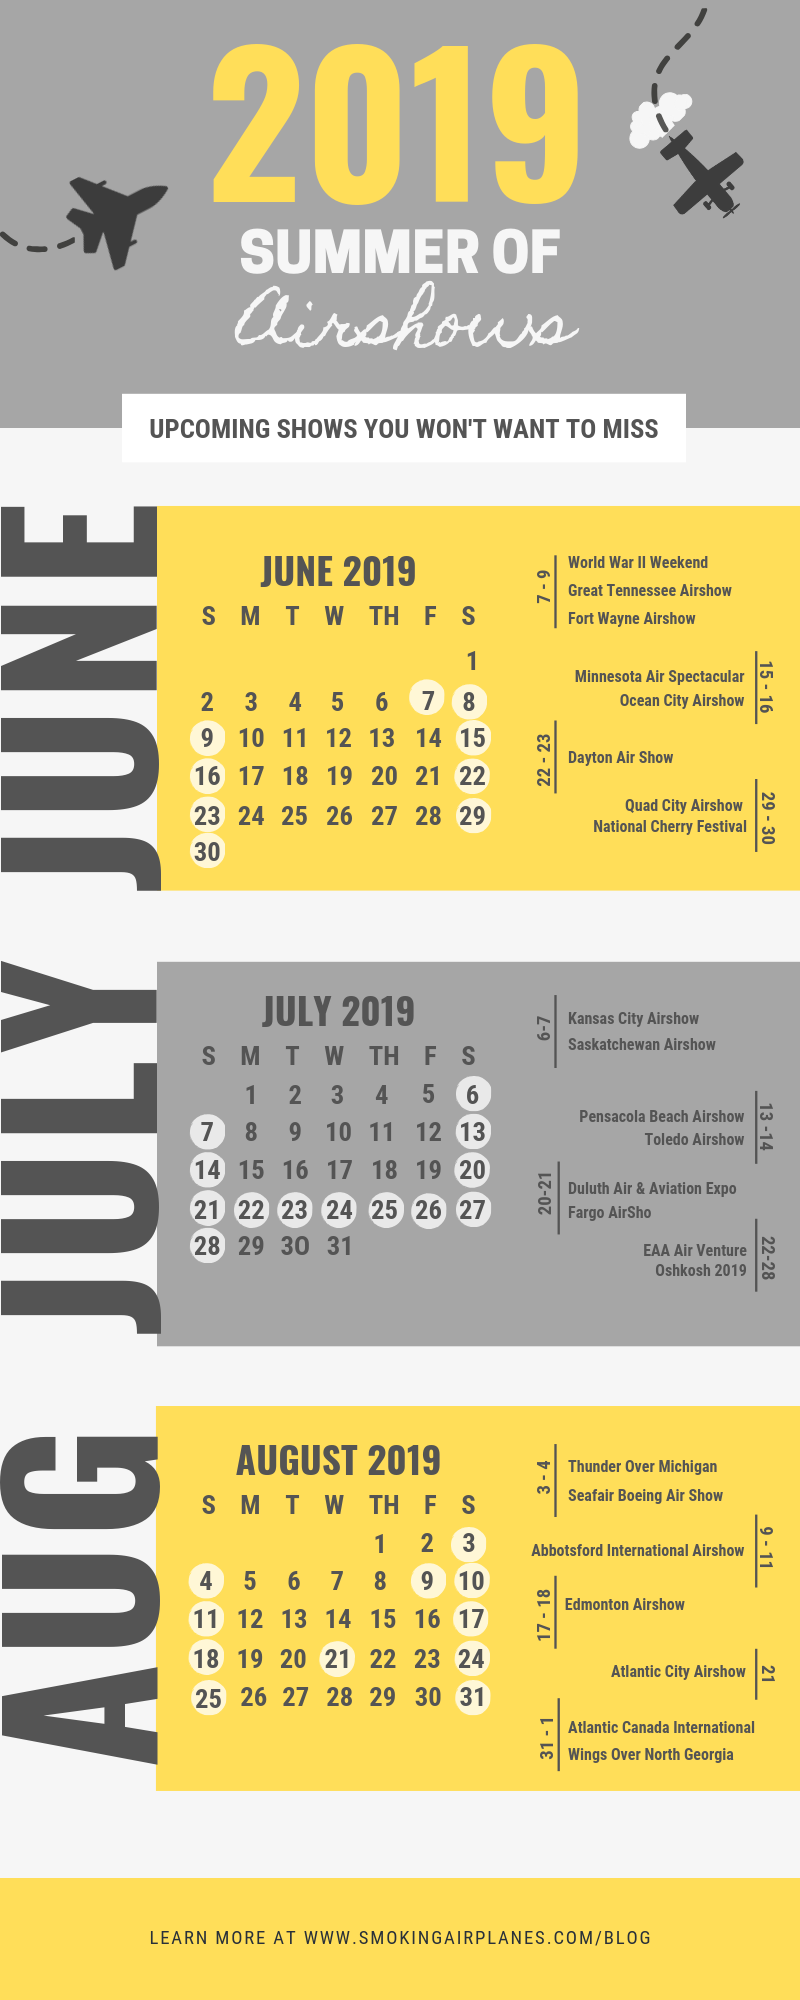 Summer 2019 Airshows Infographic